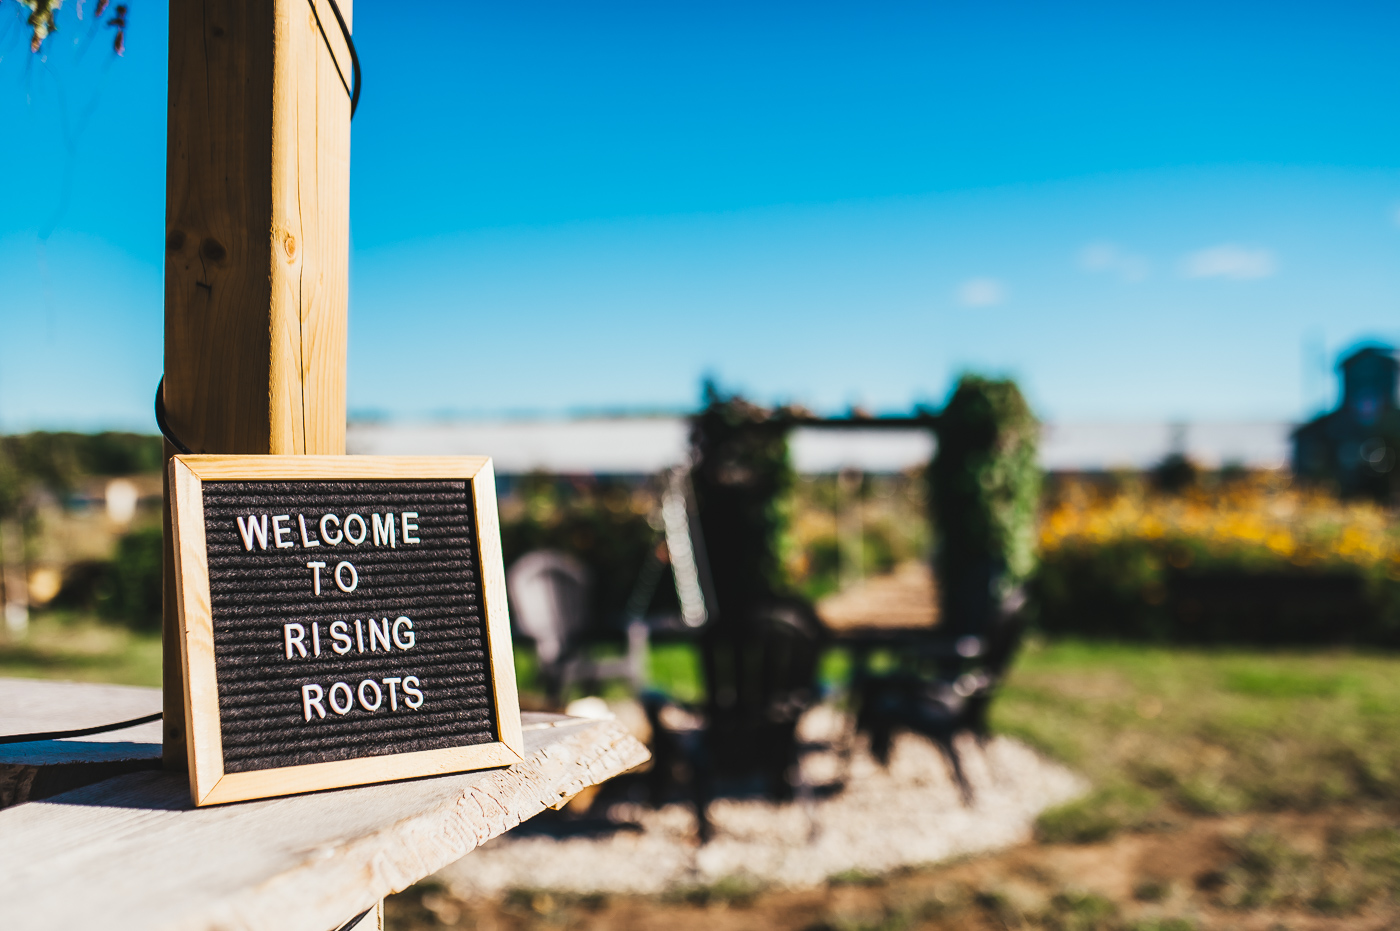 Welcome to Rising Roots felt sign with campfire and garden in background